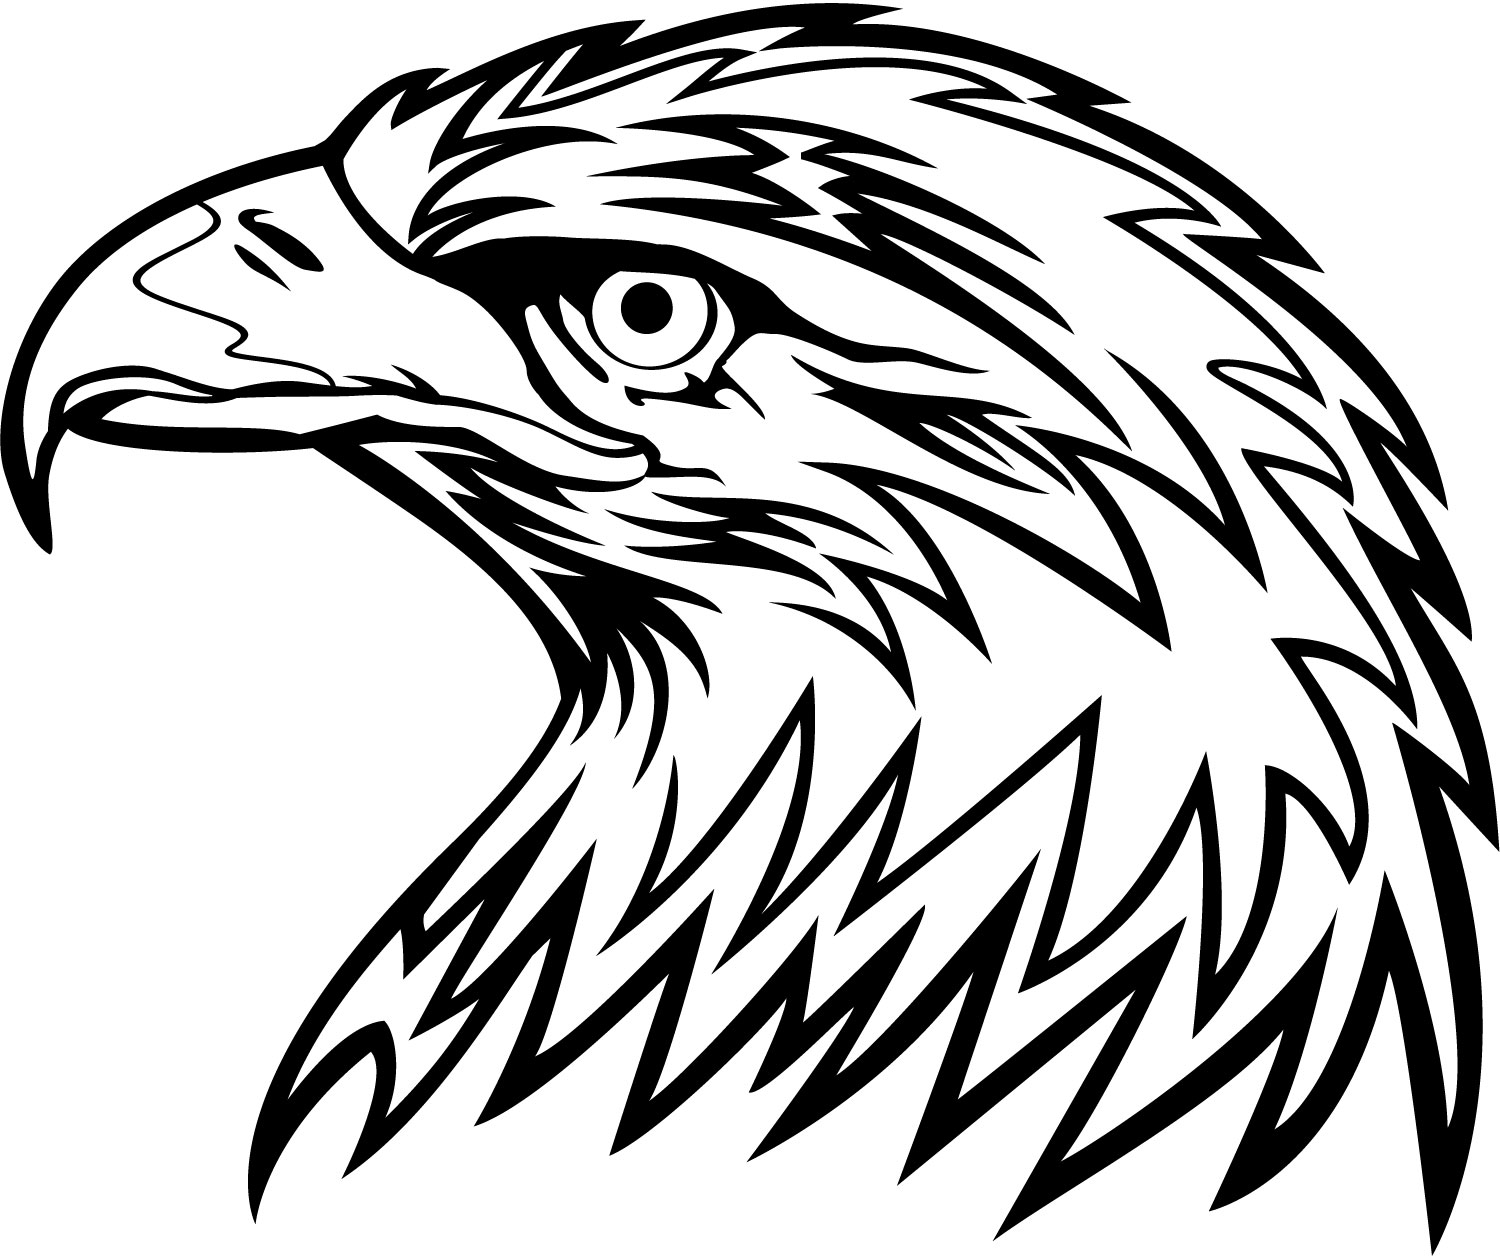 14 Vector Eagle Line Drawing Images - Line Drawing of Soaring Eagle